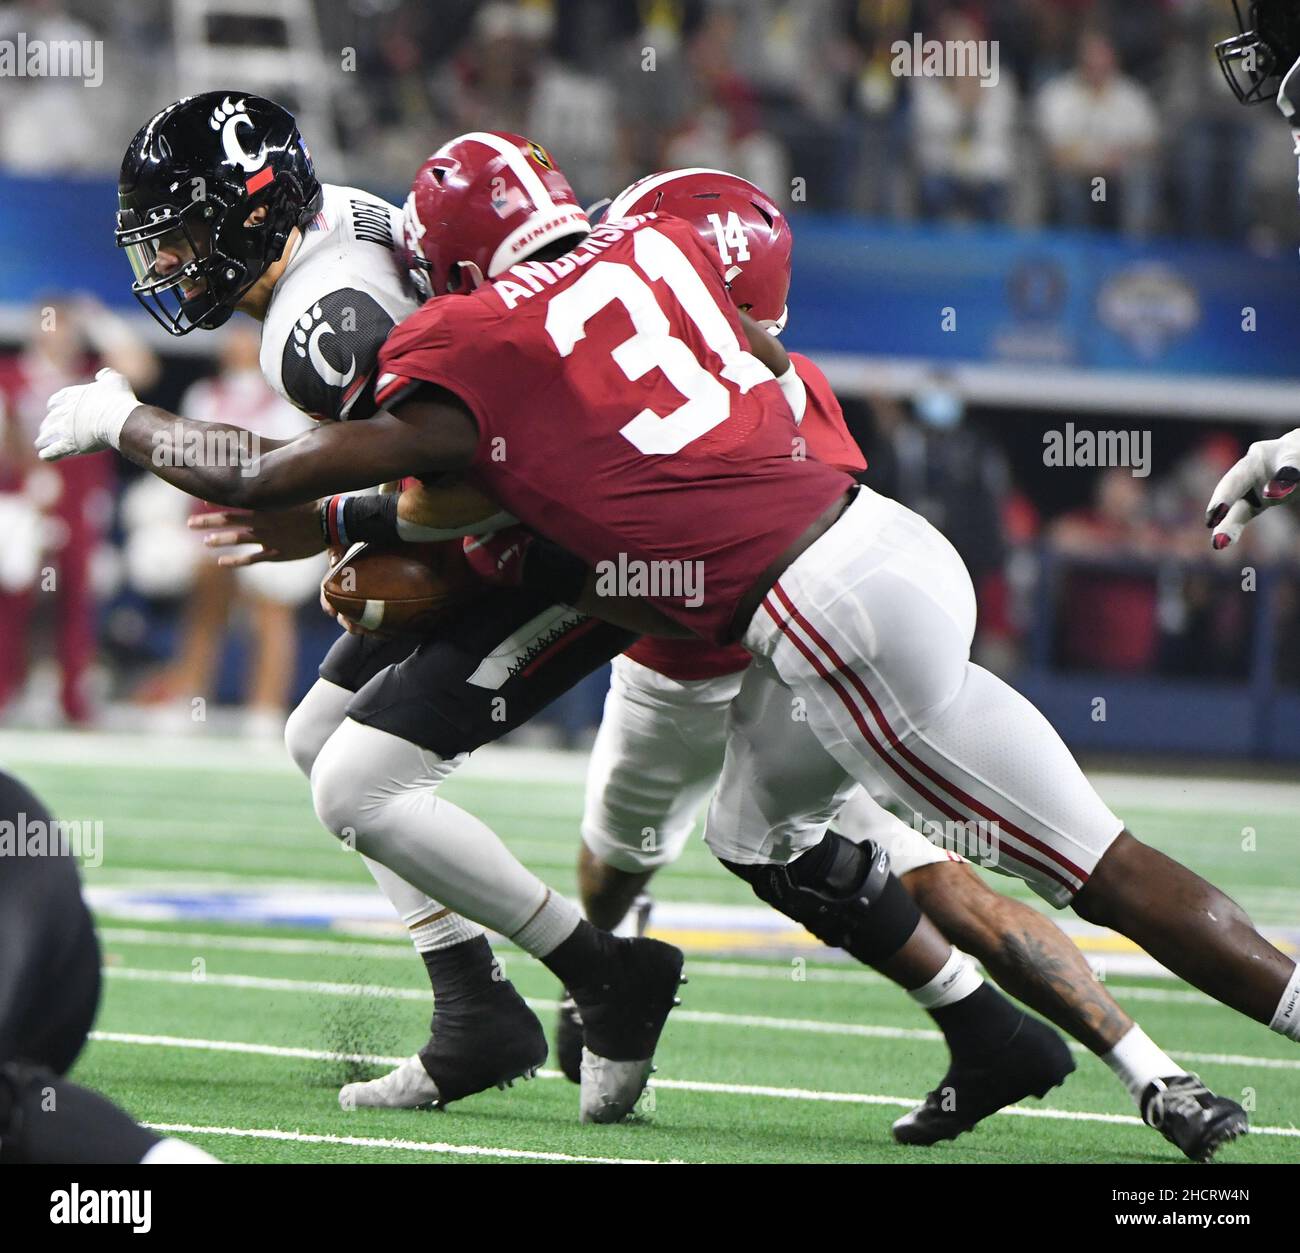 Arlington, USA. 31st Dec, 2021. The Alabama defense sacks Cincinnati quareterback Bryce Young in the 2021 Cotton Bowl Classic, one of the College Football Playoff Semifinal games, on Friday, December 31, 2021 at AT&T Stadium in Arlington, Texas. The Tide won 27-6 and will play for the national championship on January 10, 2022. Photo by Ian Halperin/UPI Credit: UPI/Alamy Live News Stock Photo